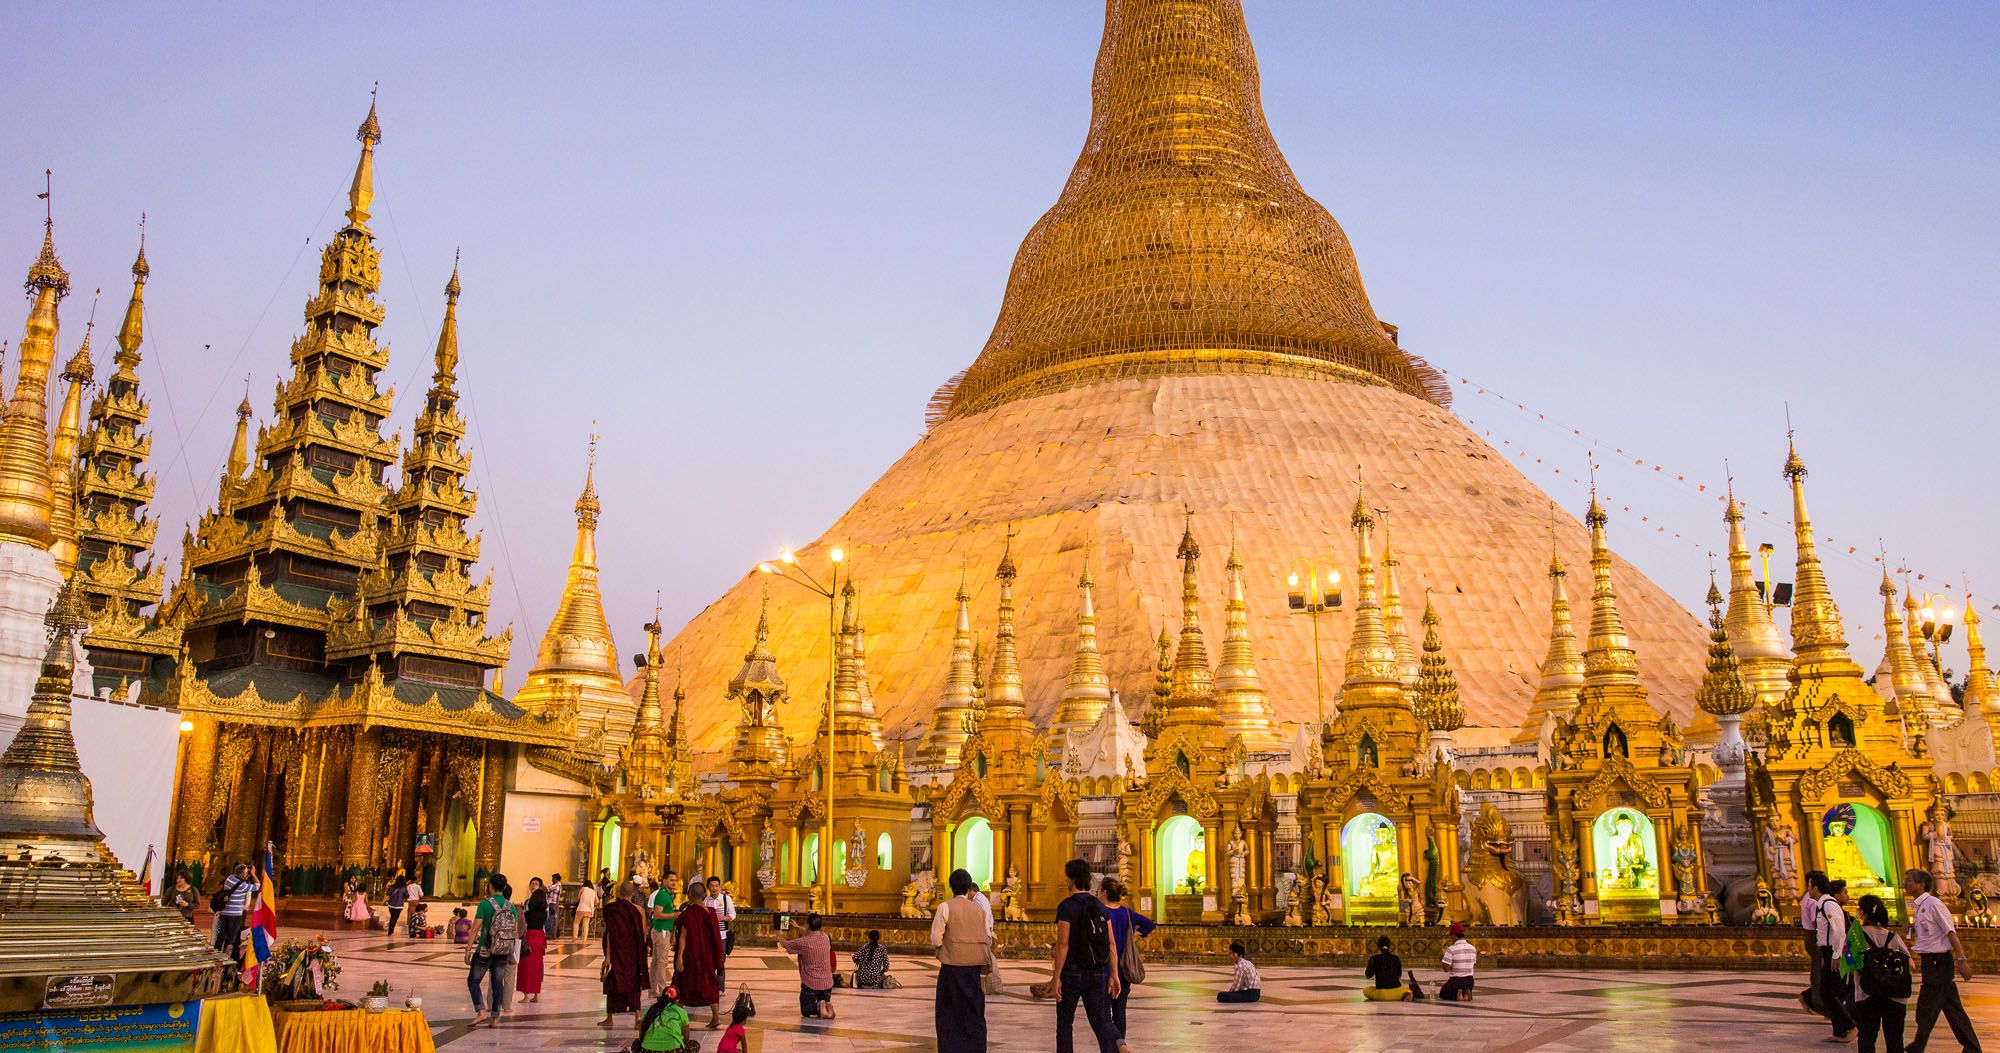 Featured image for “Yangon, Our Introduction to Myanmar”